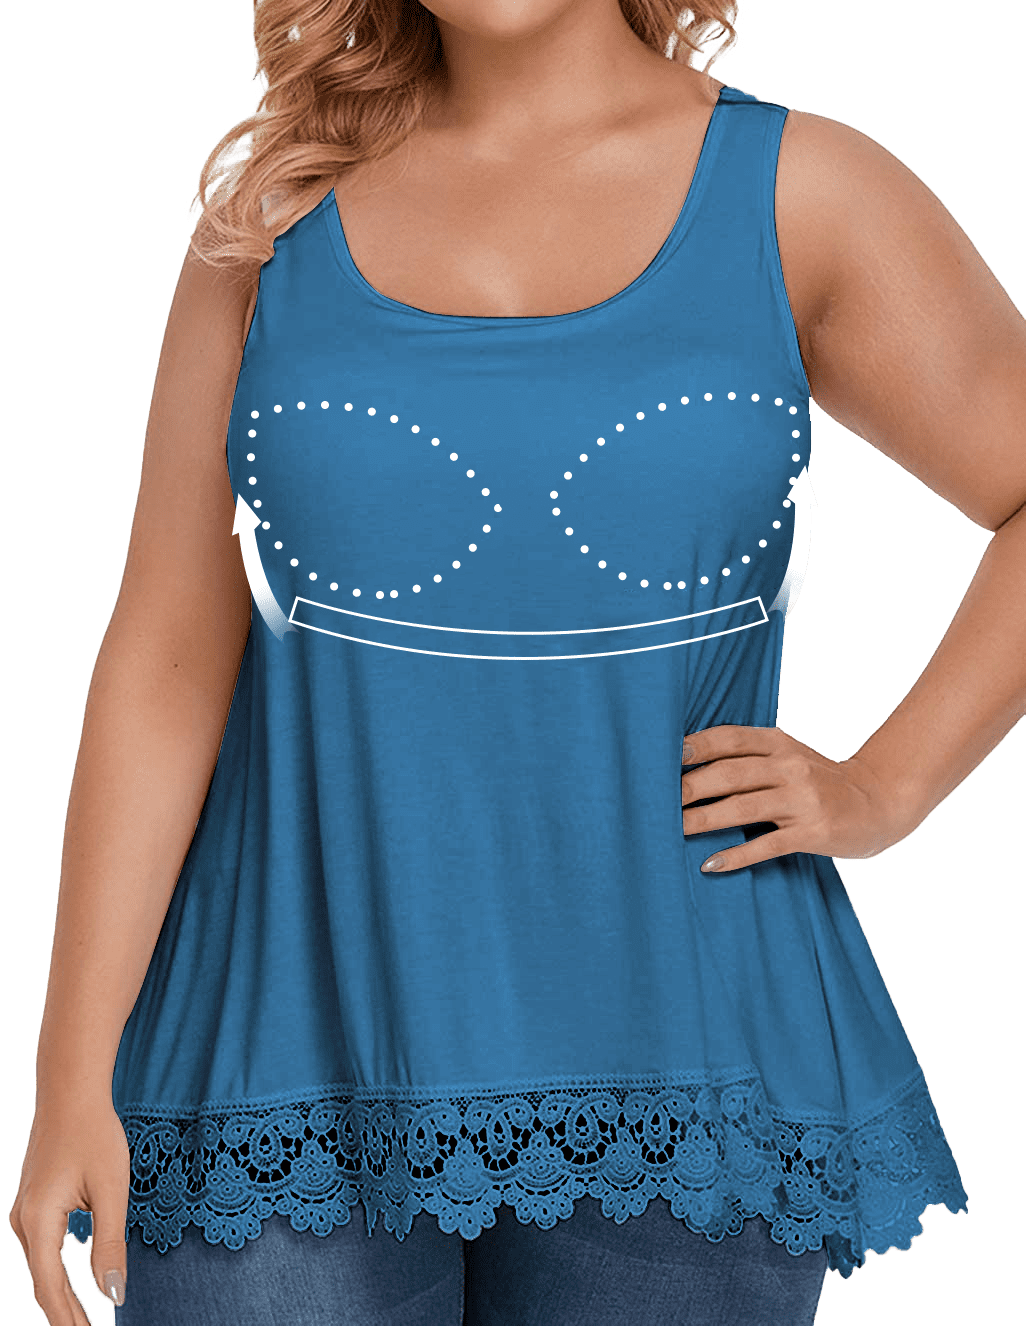 COMFREE Women's Camisole with Built in Bra Tank Top Flowy Swing Pleated  Tank Top Cami with Adjustable Strap 